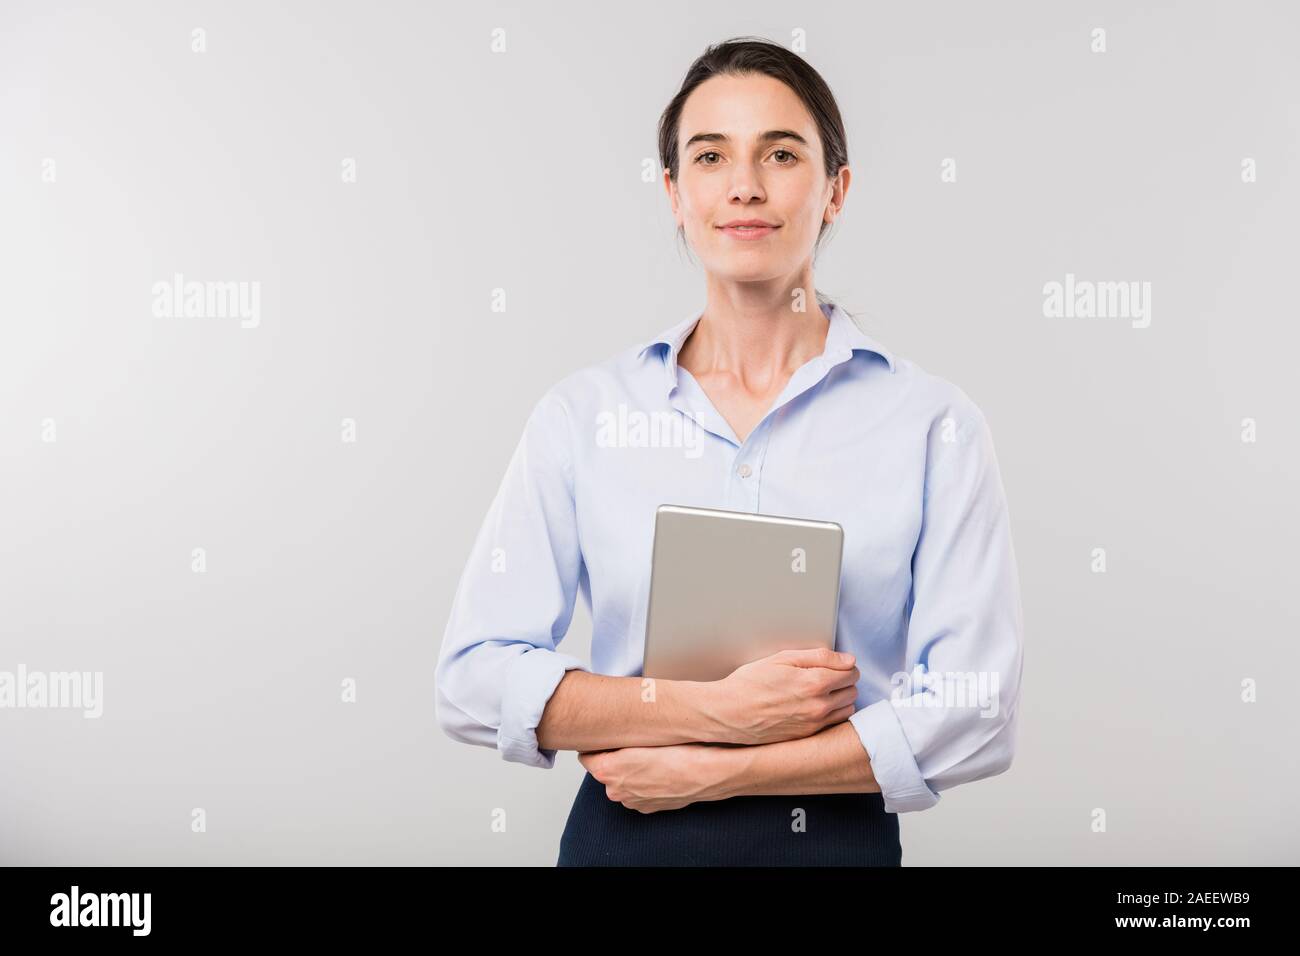 Young elegant businesswoman with touchpad standing in front of camera Stock Photo